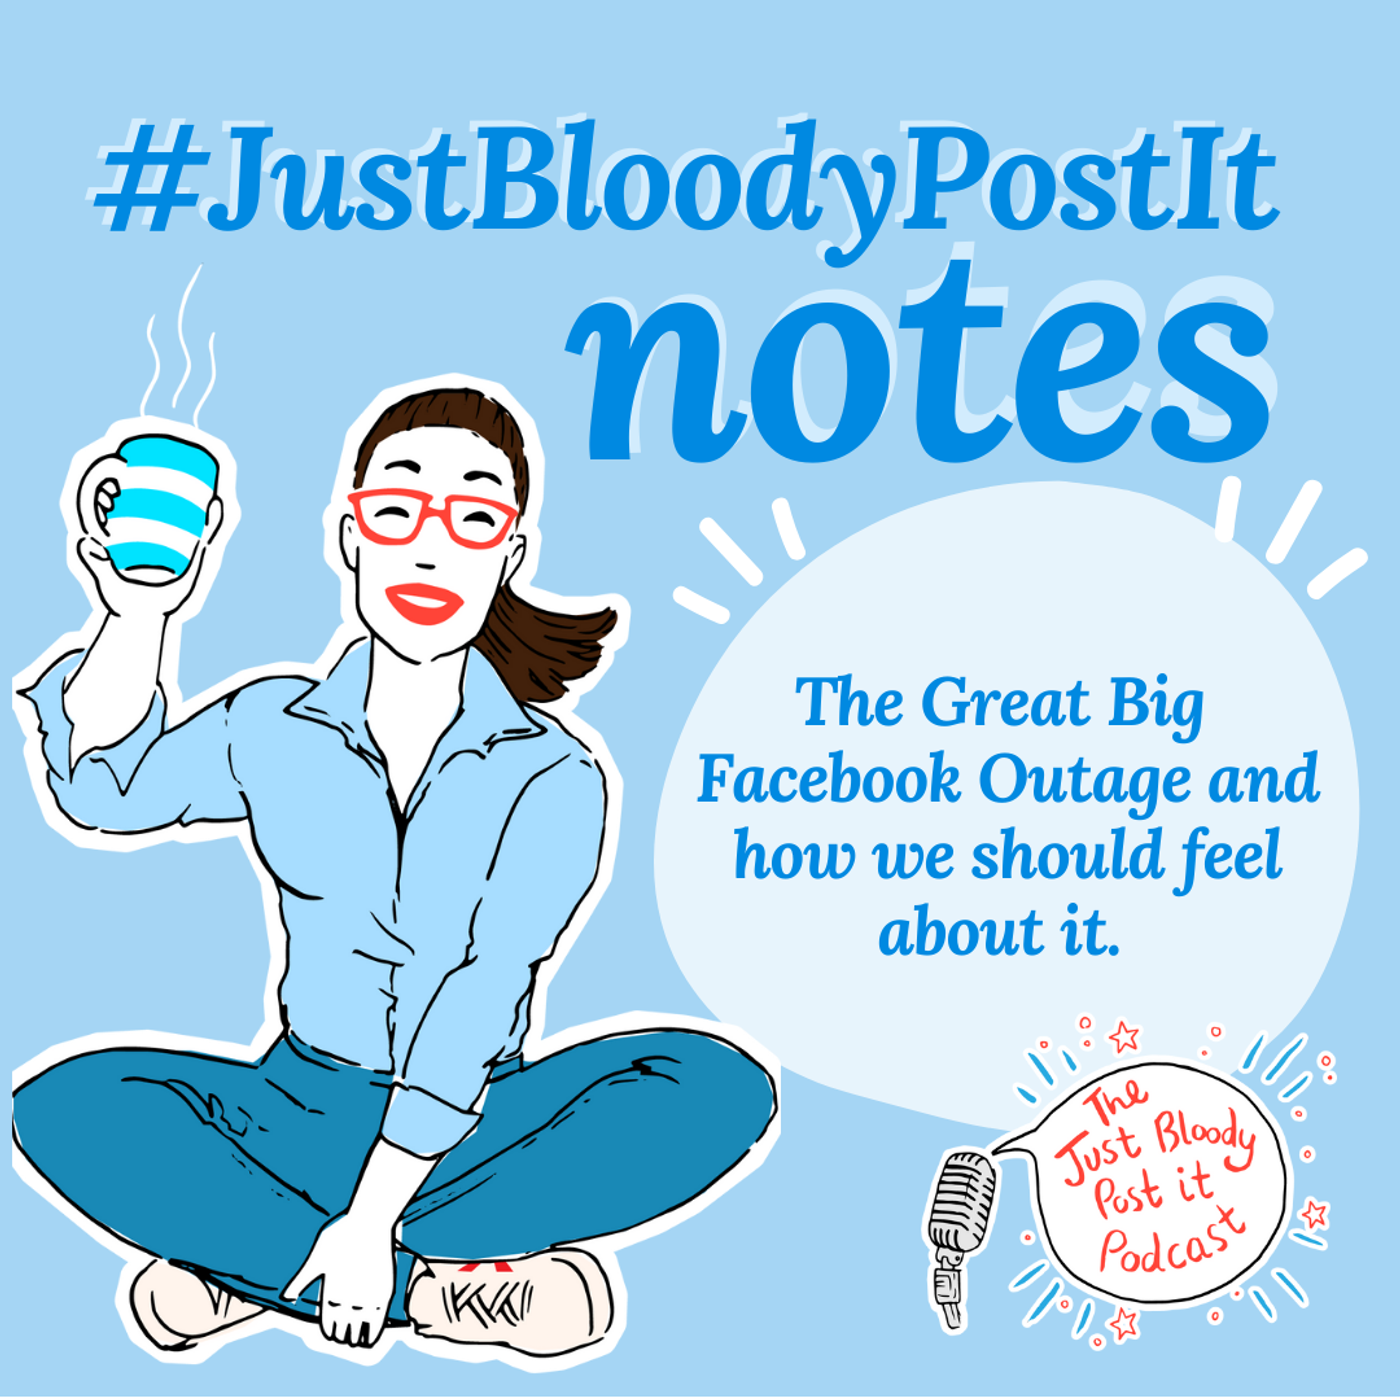 S2 Ep21: Bonus #JustBloodyPostIt note: The Great Big Facebook Outage and how we should feel about